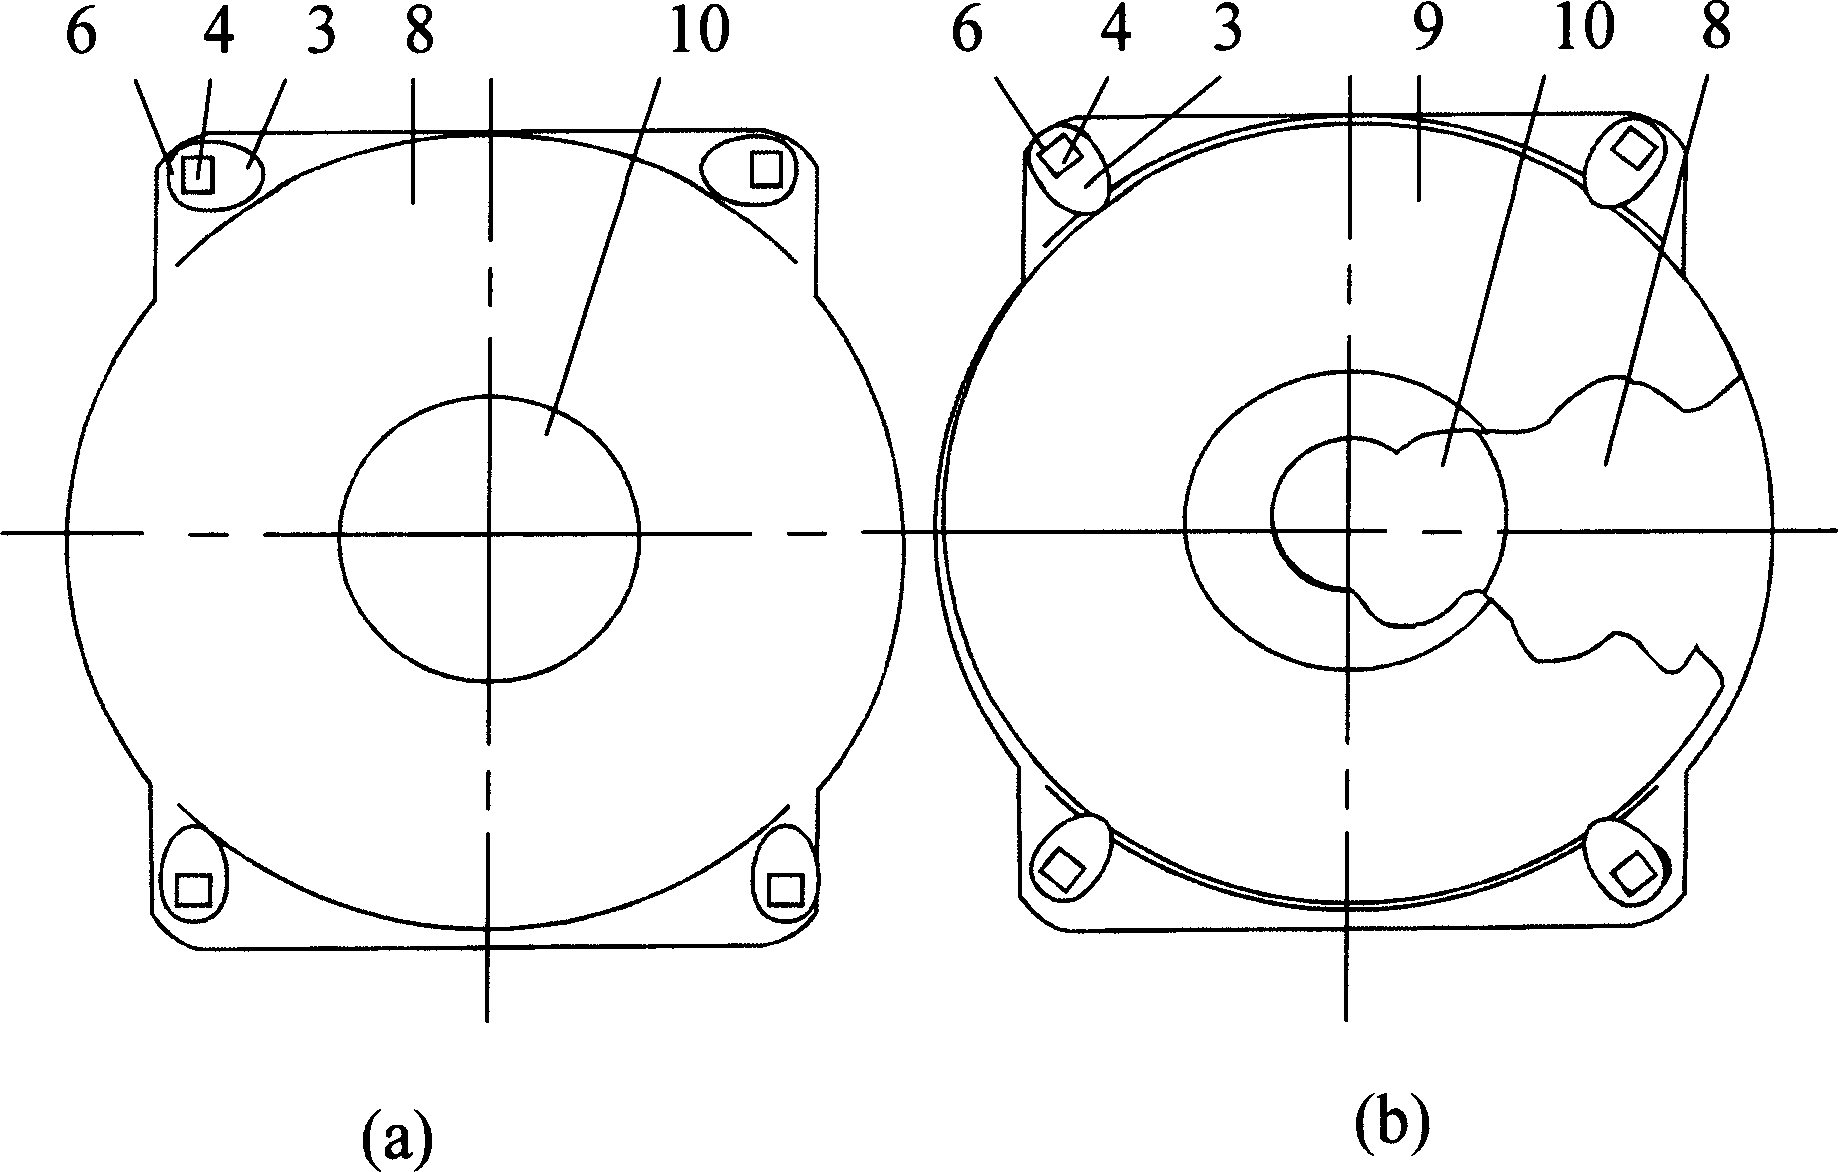 CD read/write apparatus with top solid